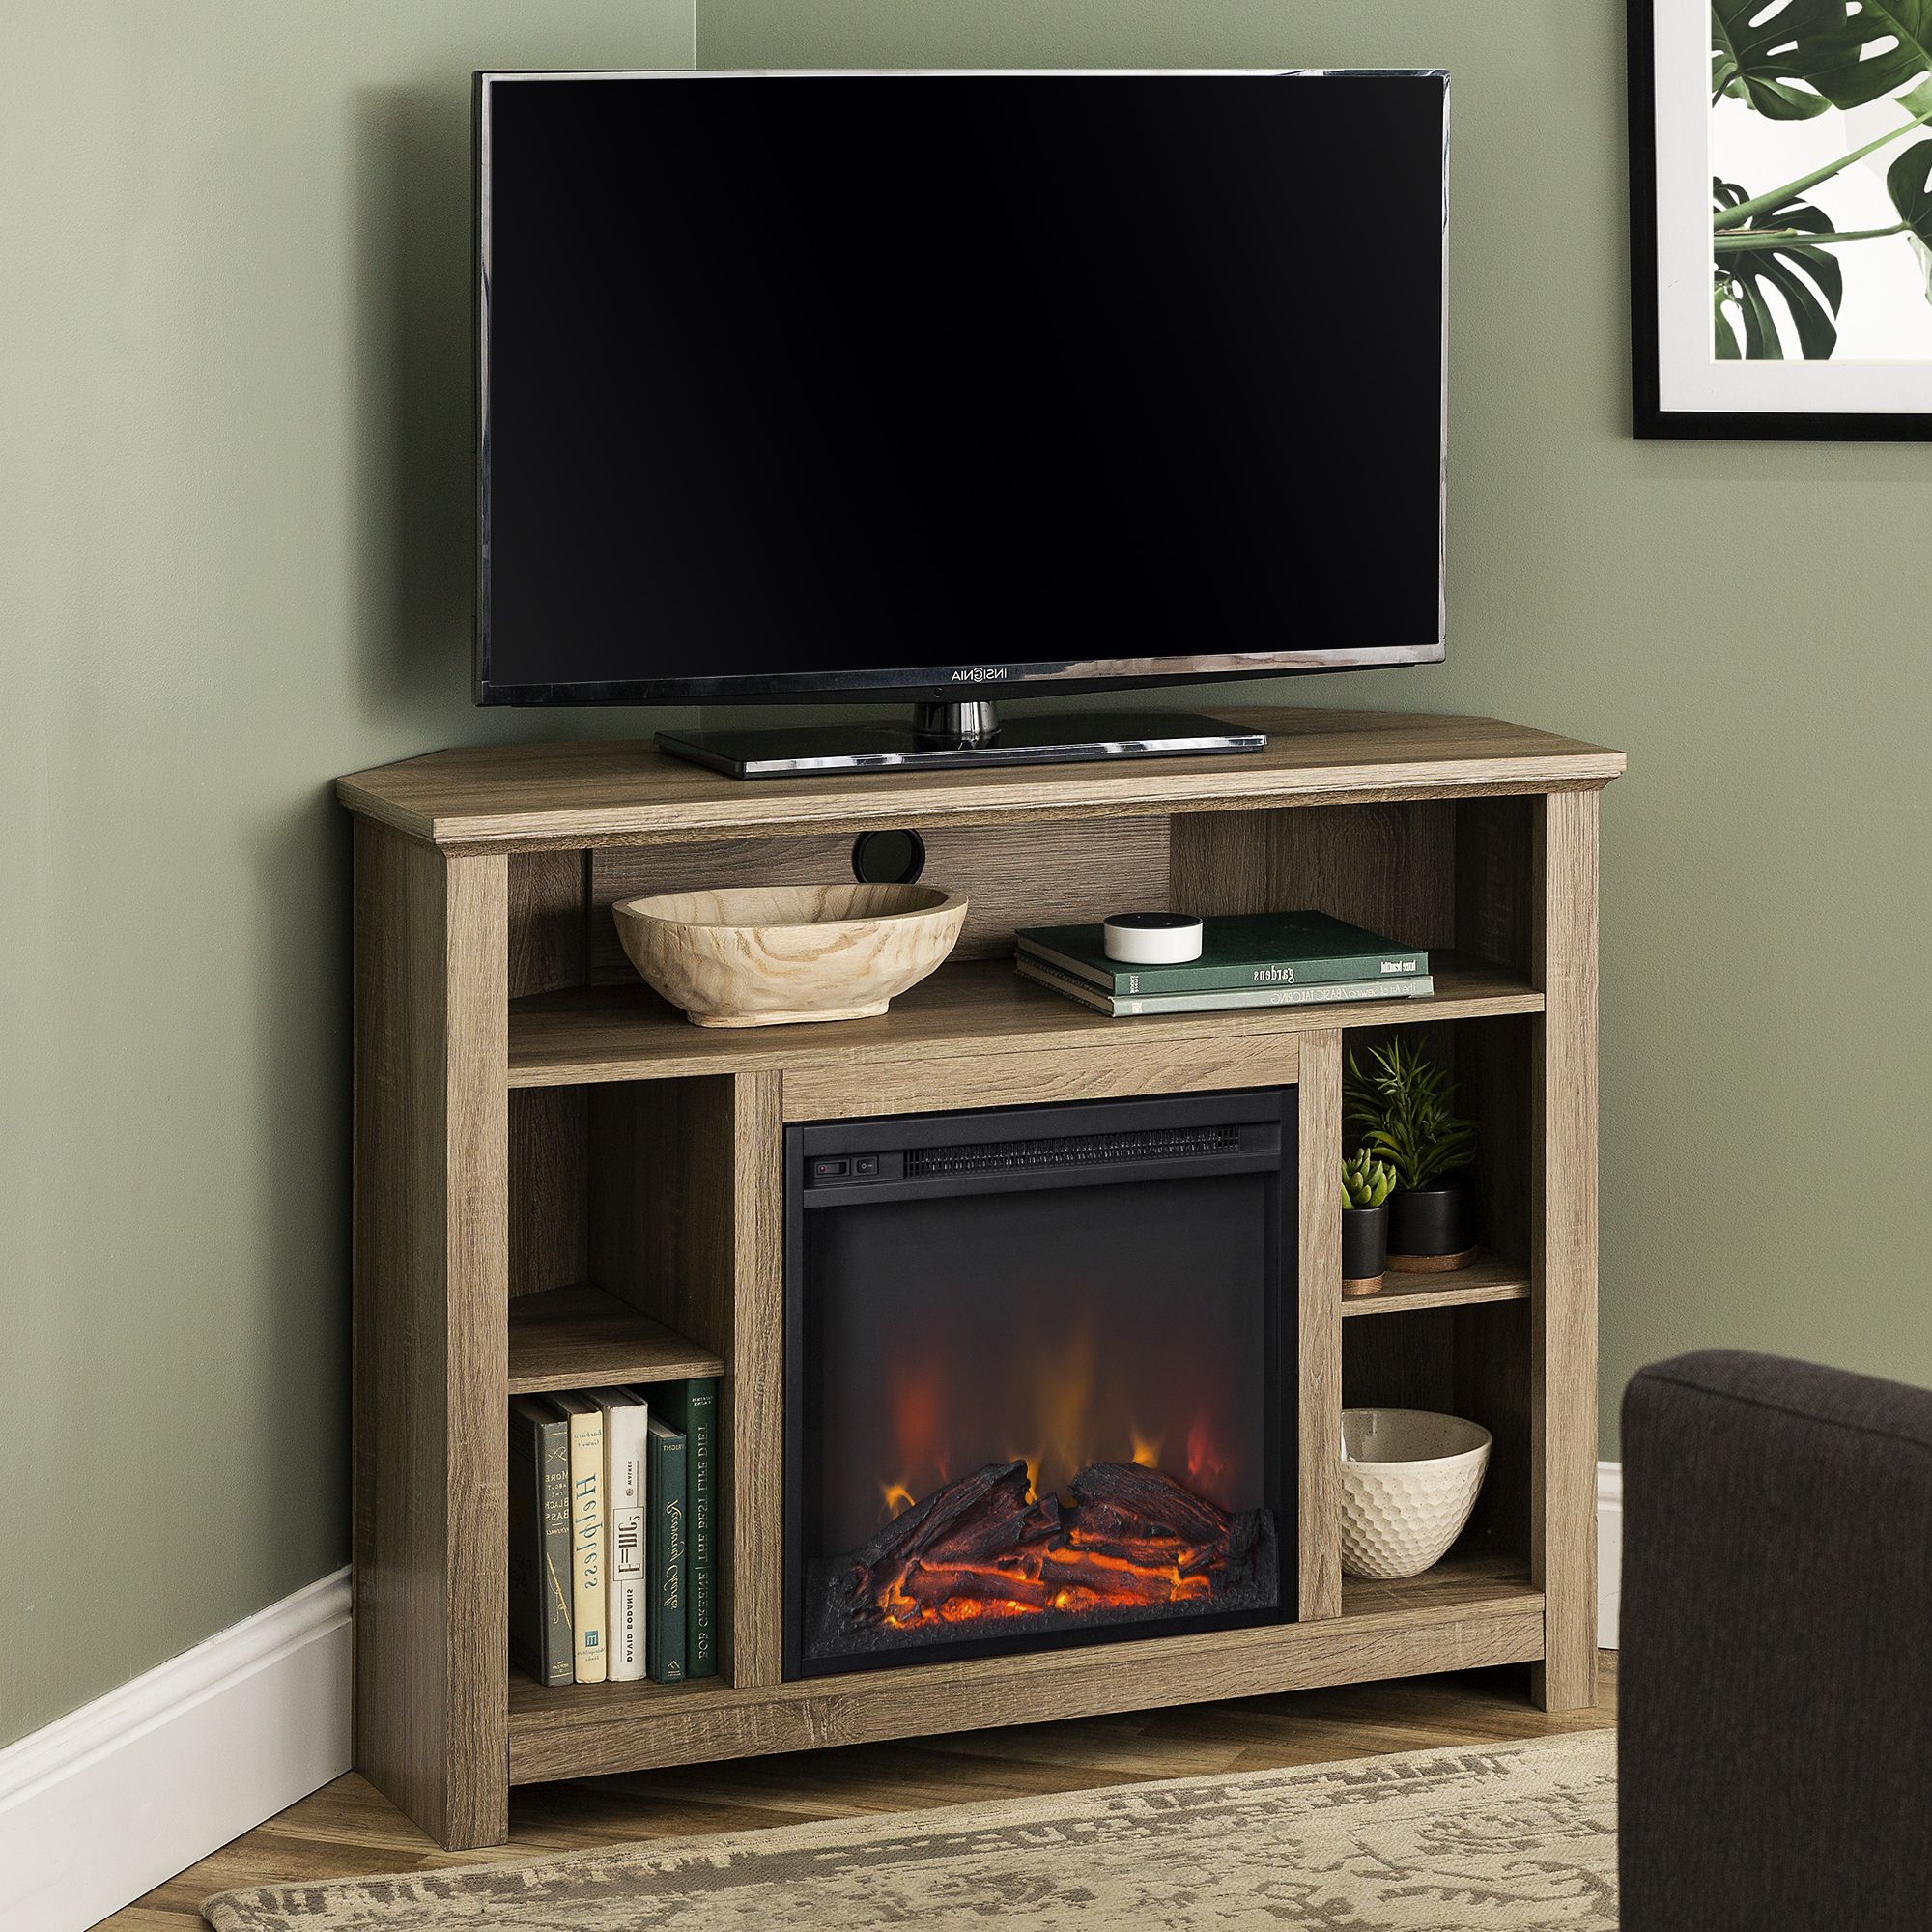 Manor Park Tall Corner Fireplace Tv Stand For Tvs Up To 50 Within Caleah Tv Stands For Tvs Up To 50" (Gallery 1 of 20)